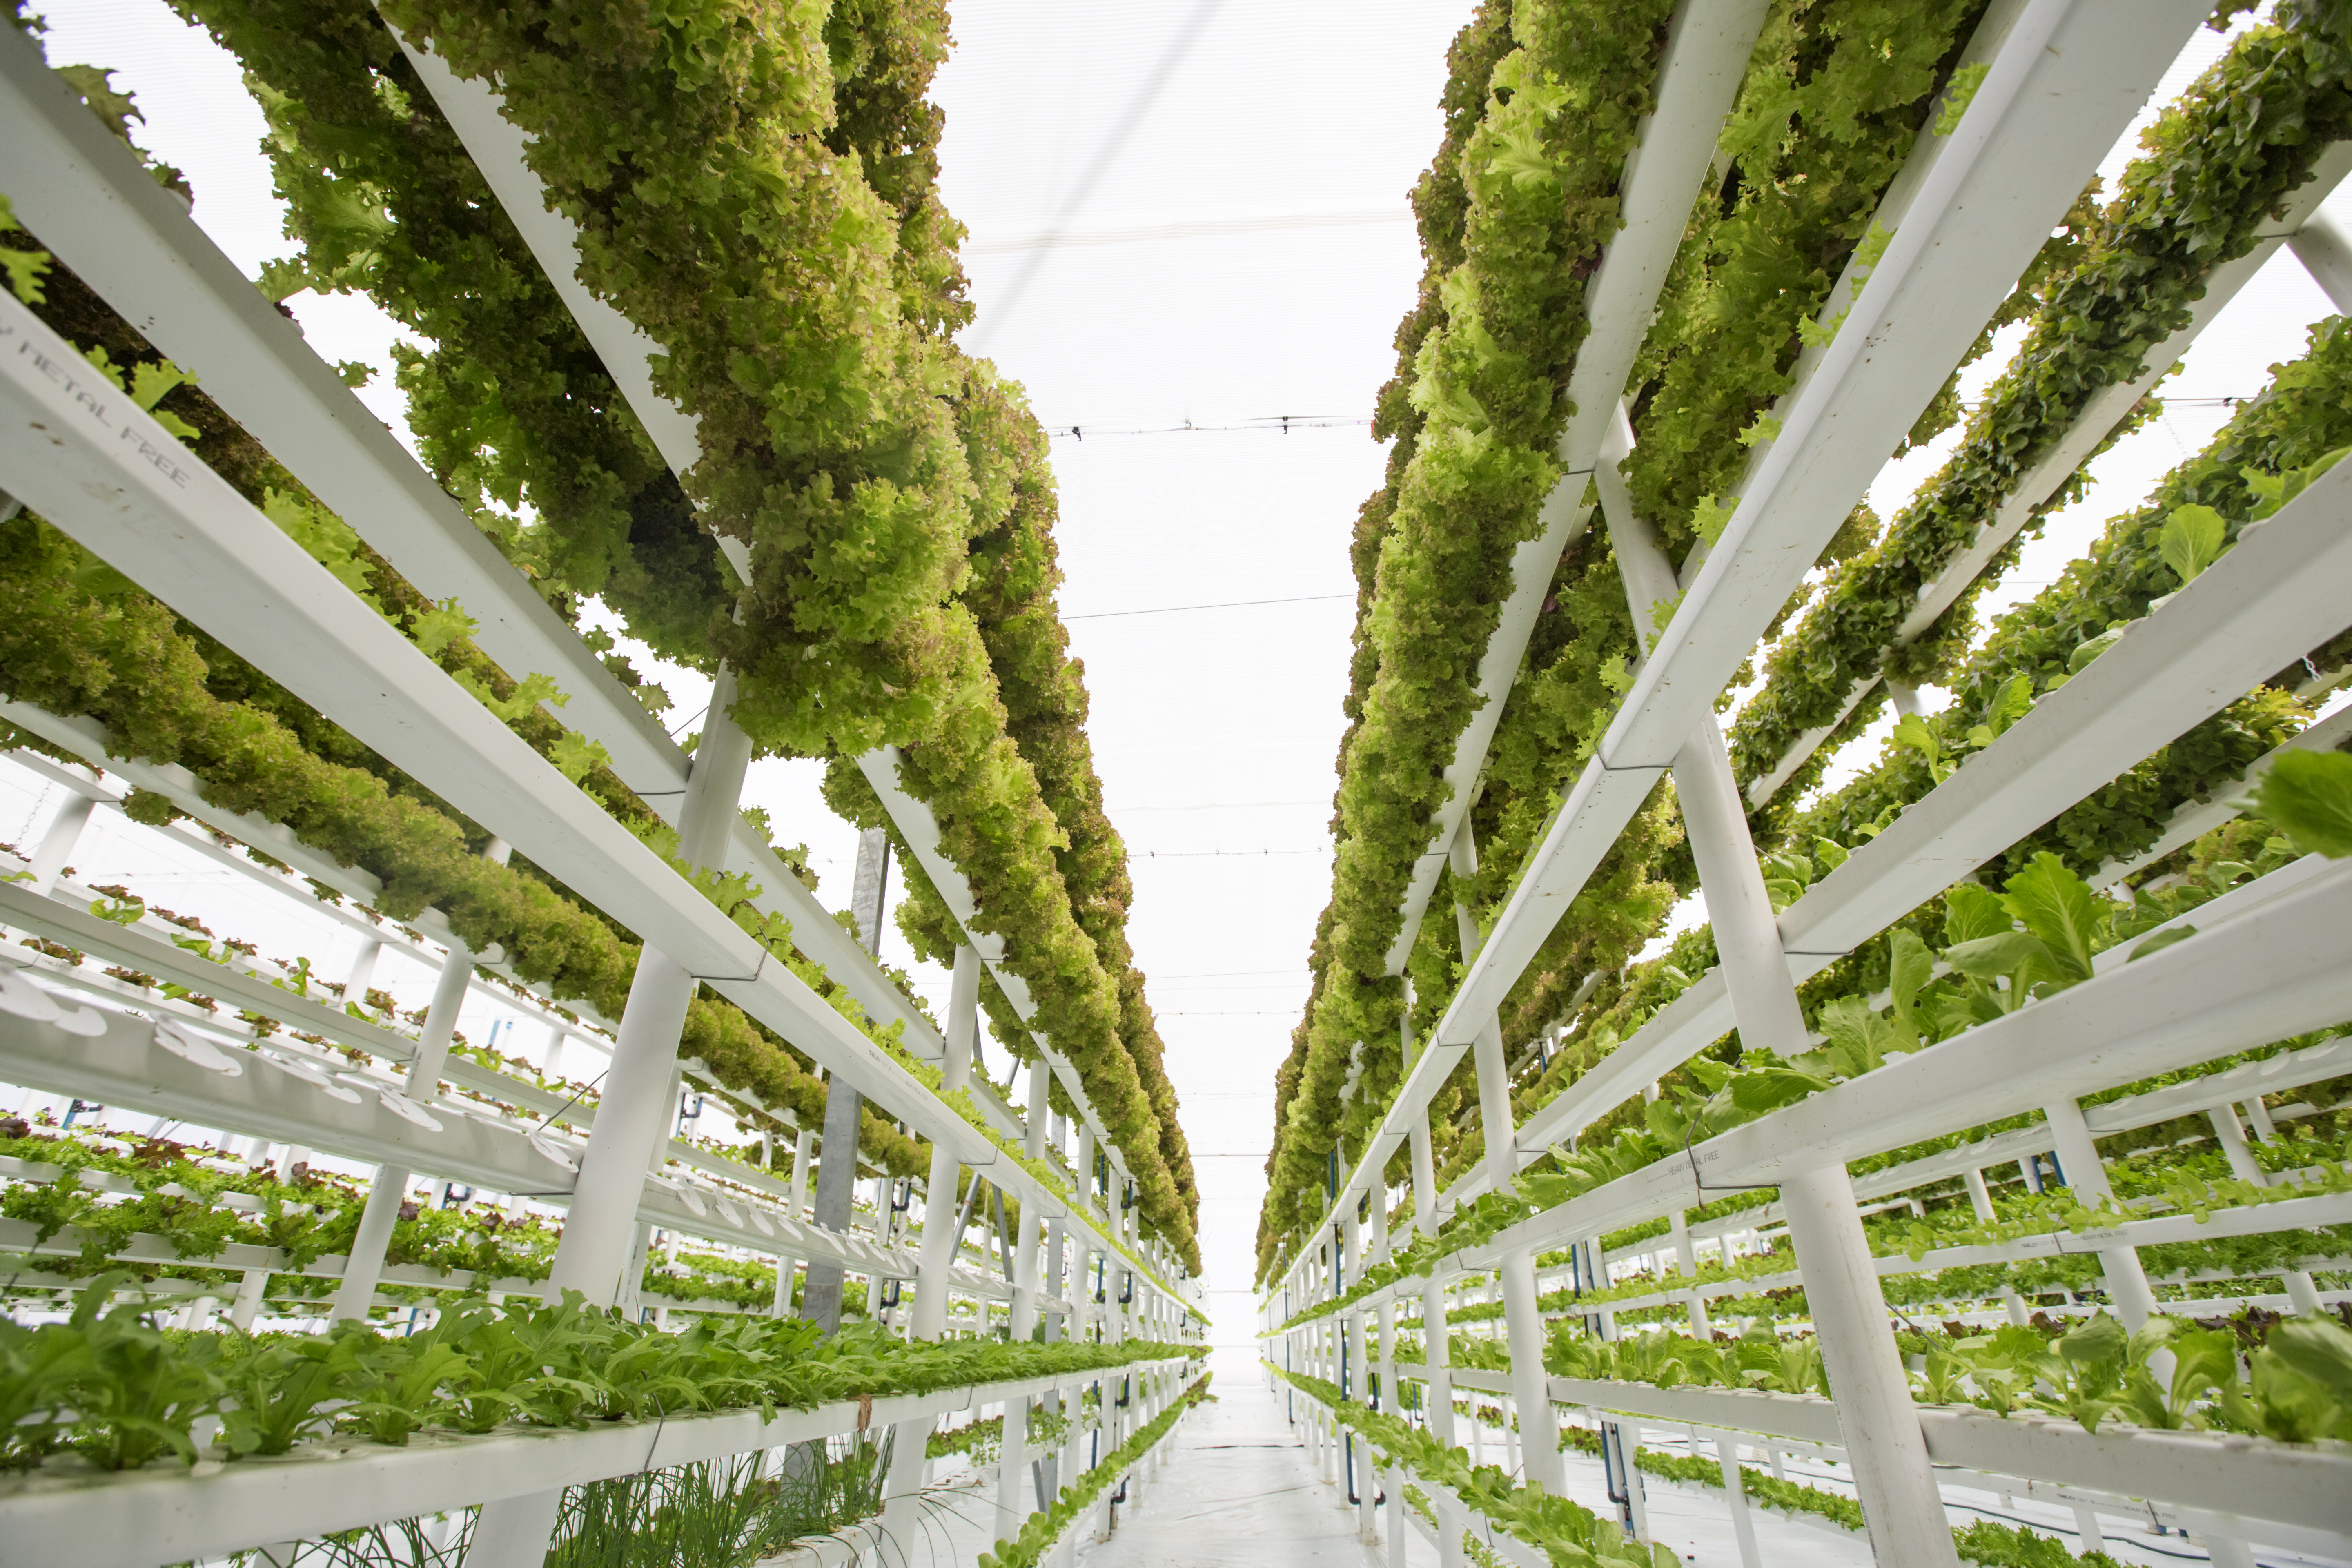 Vertical farming born out of challenges.